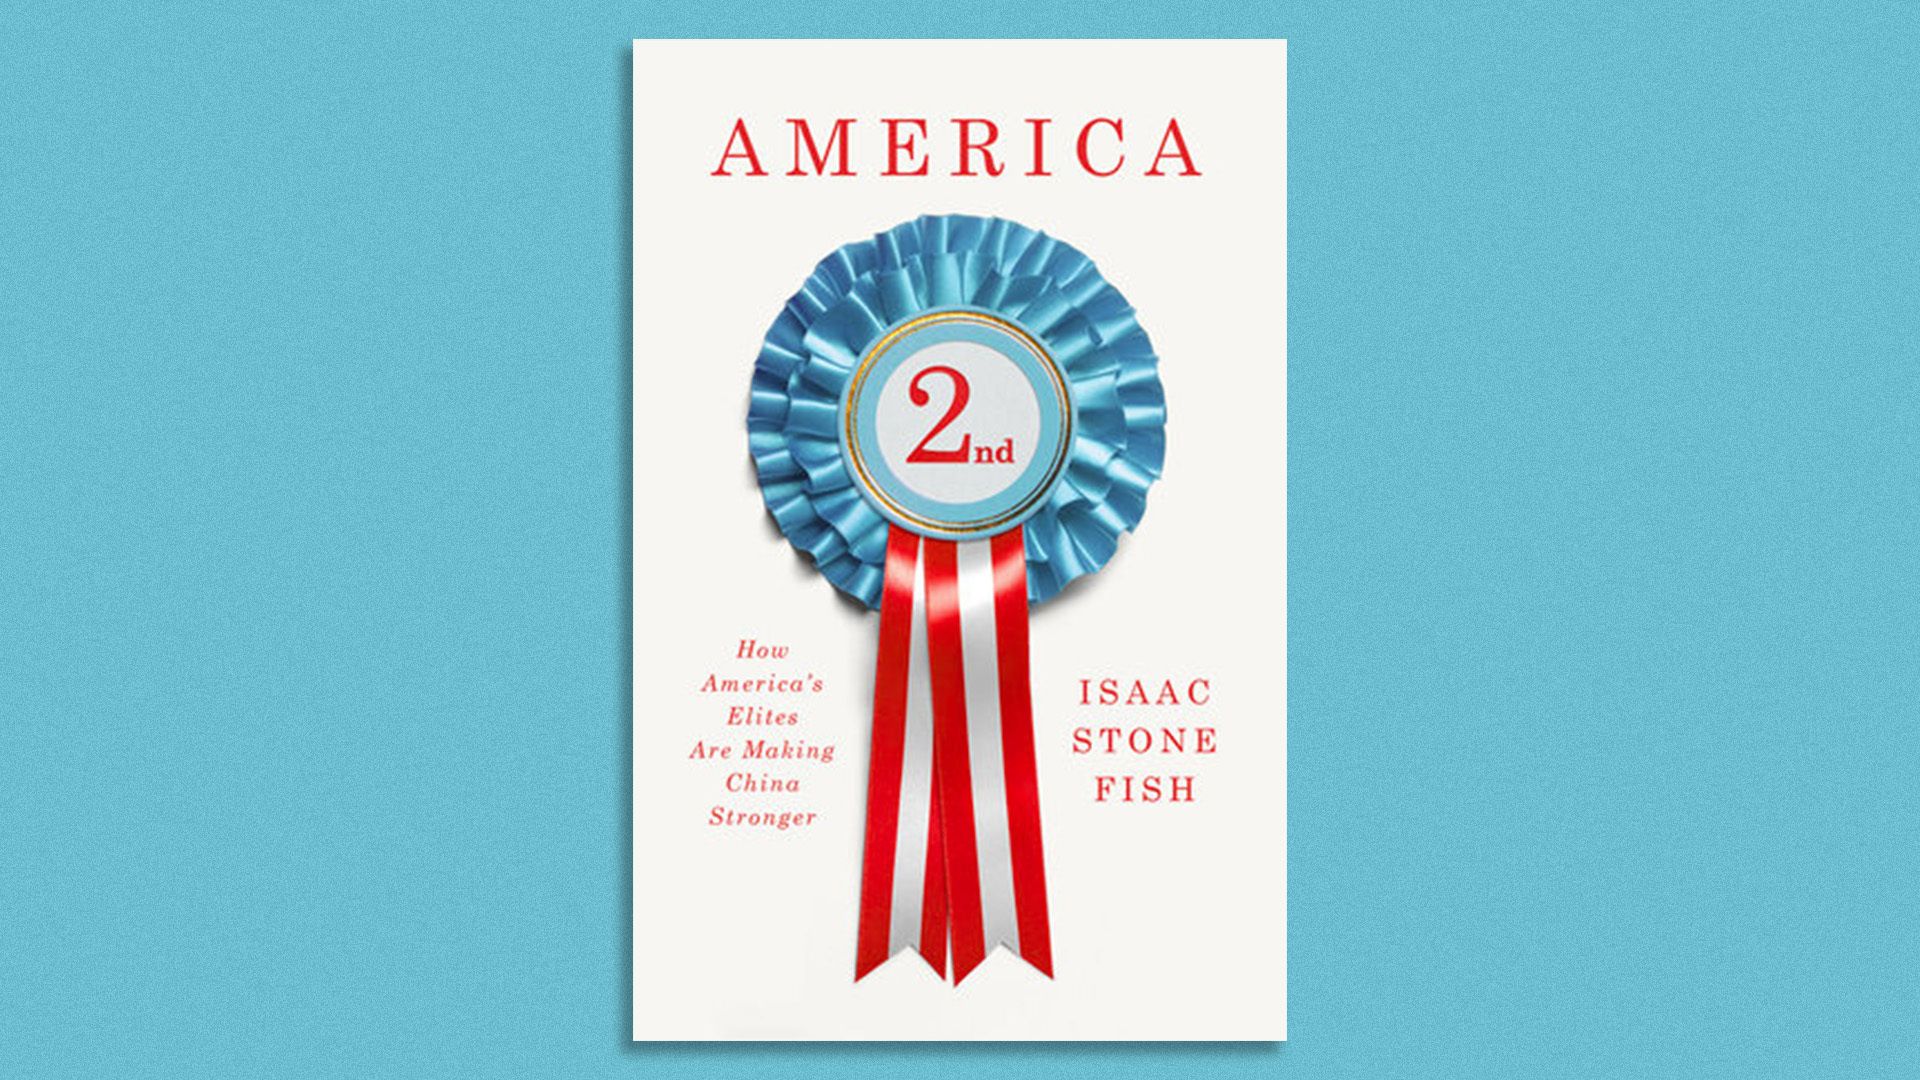 Book cover image for "America Second" by Isaac Stone Fish